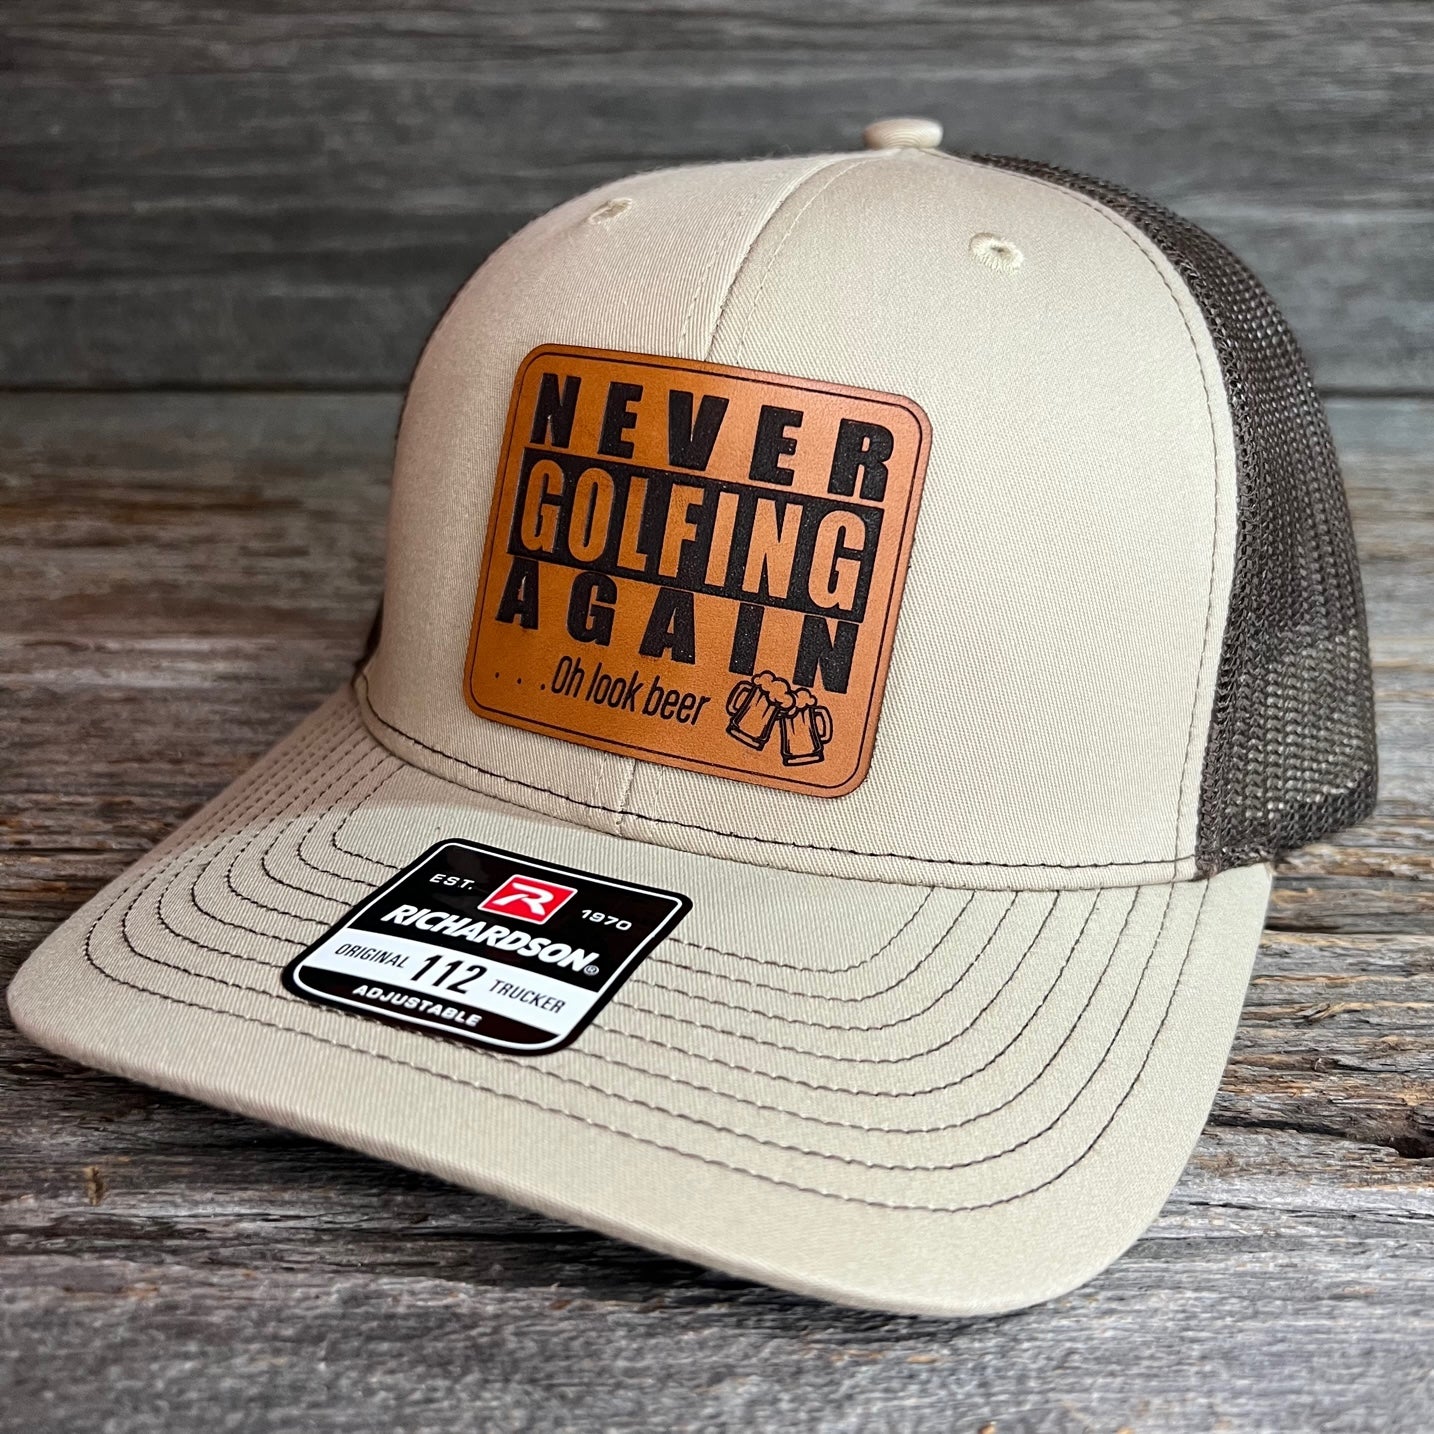 Funny Golf Hats - Click next pic for patches – 920 Hat Co.